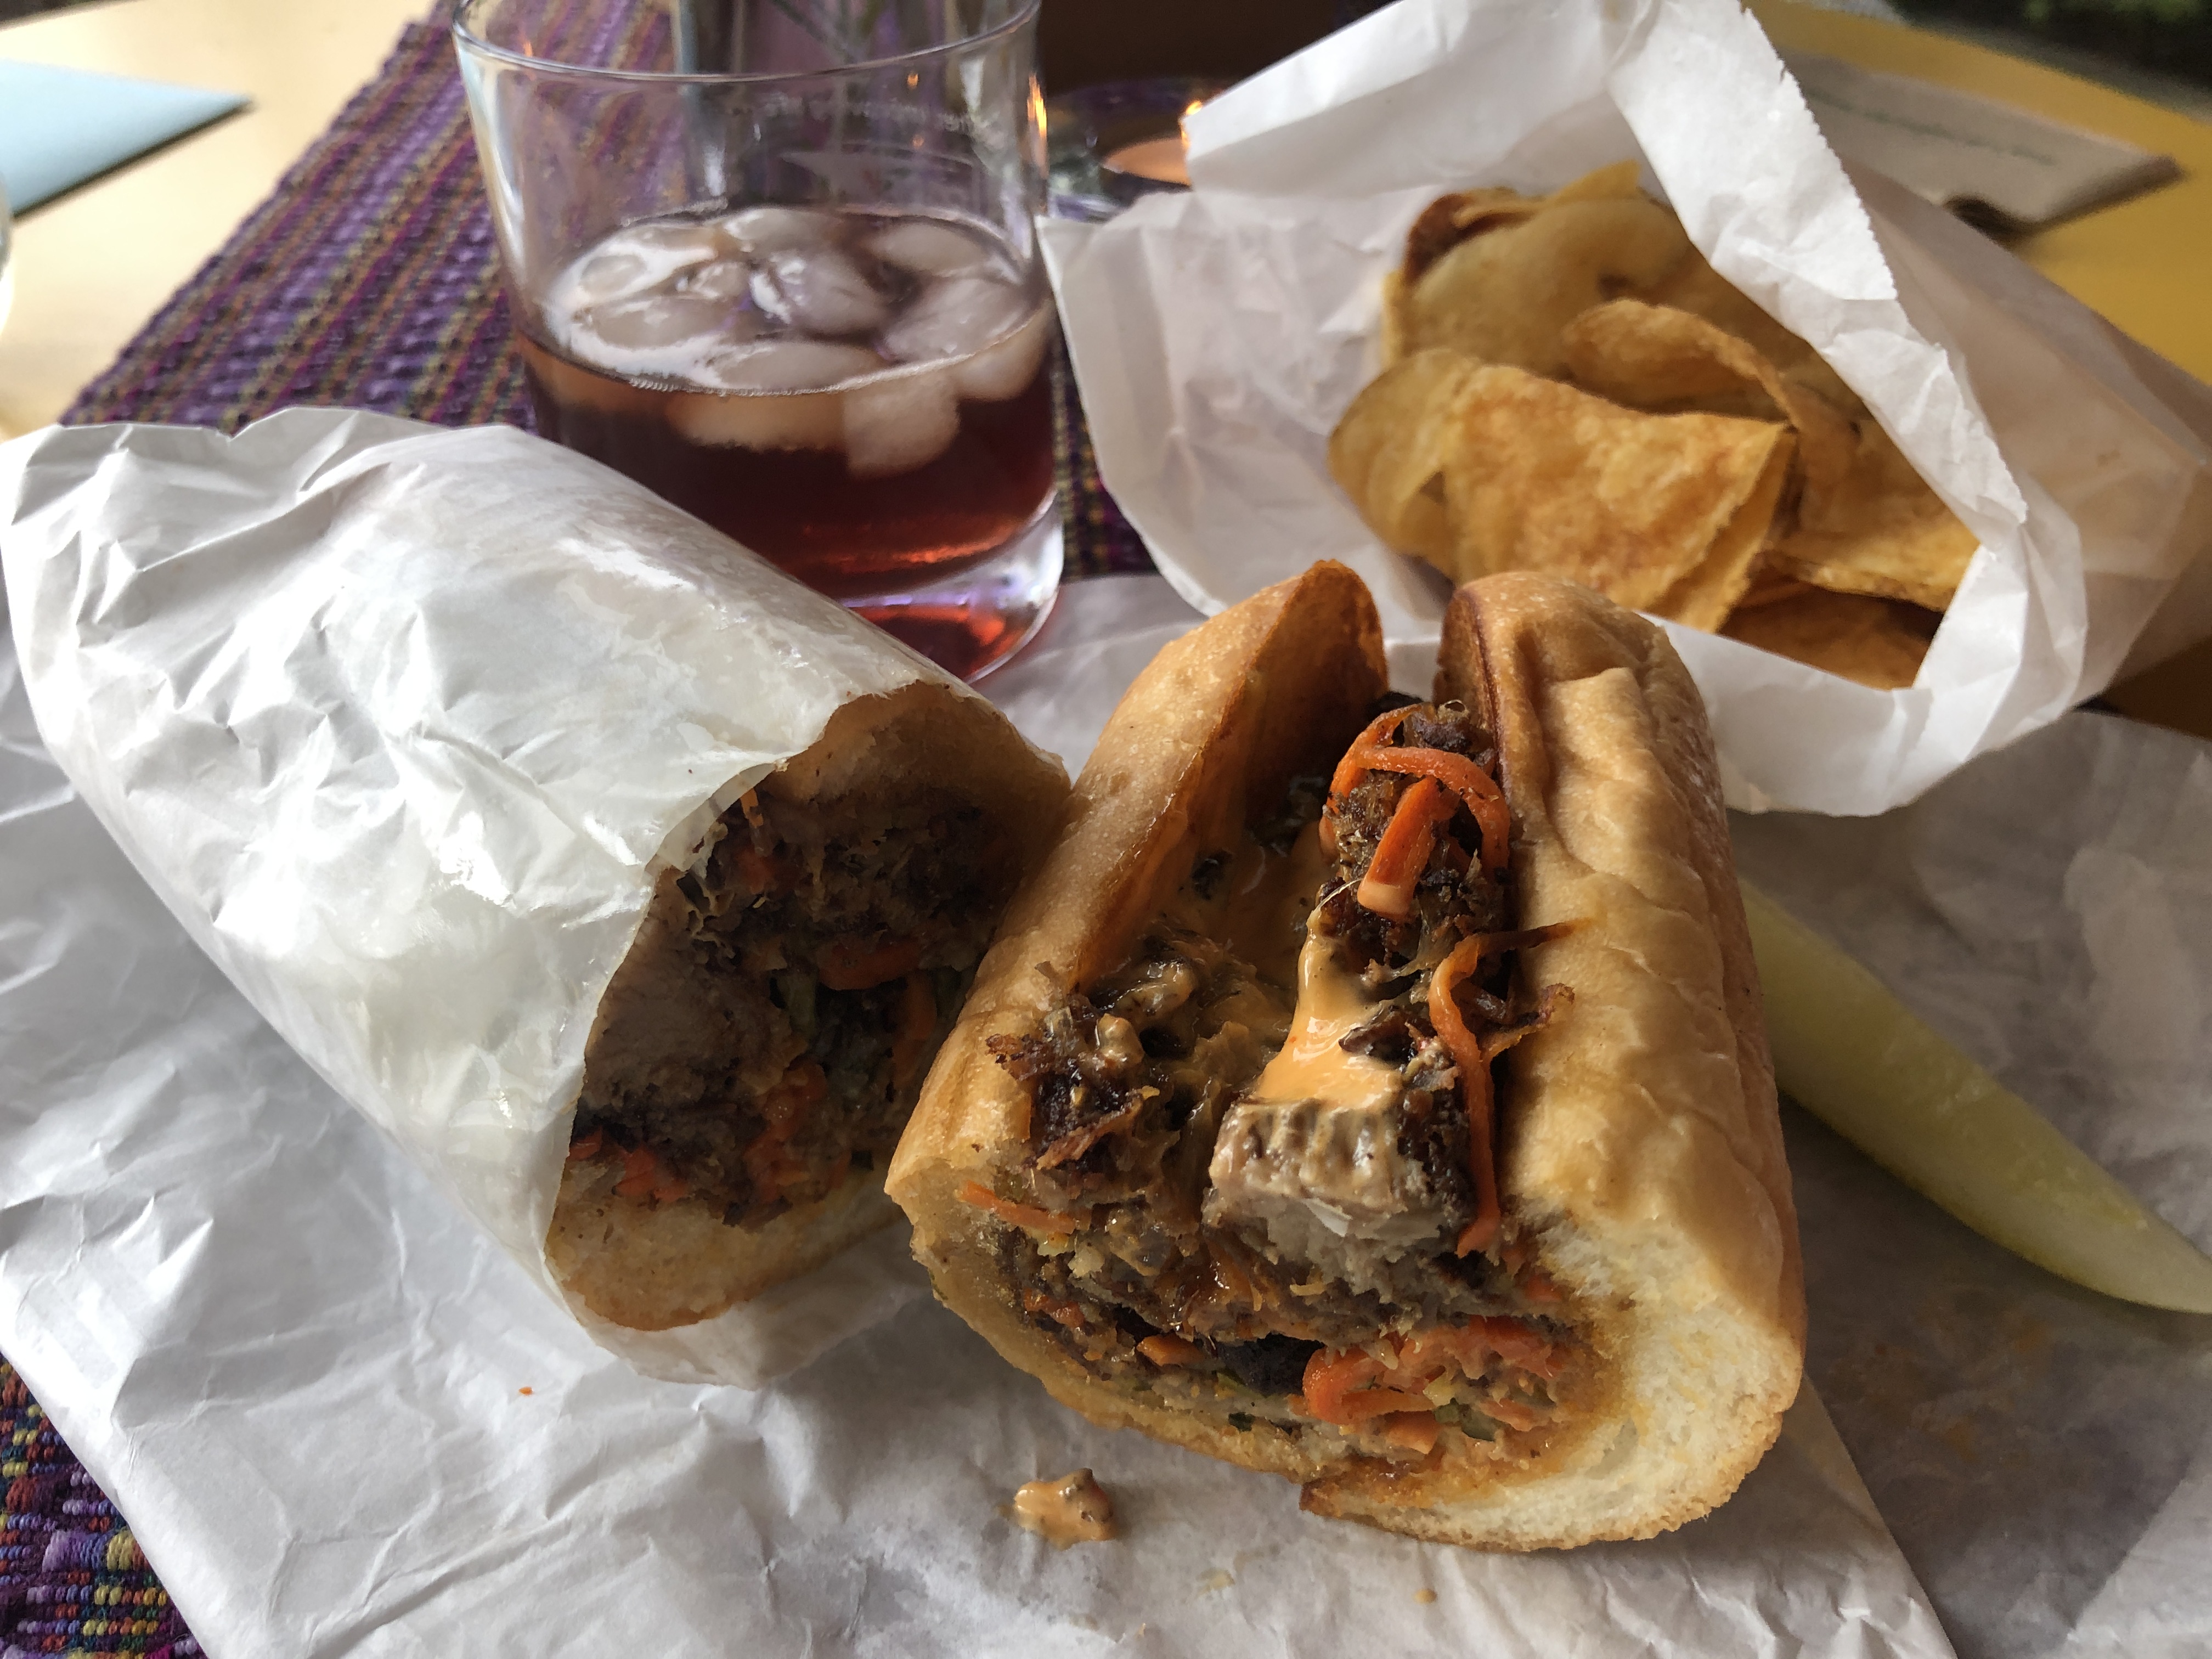 A soft hoagie roll holds a pile of browned meat layered with cheese and pickled onion and herbs. Beside it sit a white paper bag of homemade potato chips and a dark reddish brown cocktail on ice.